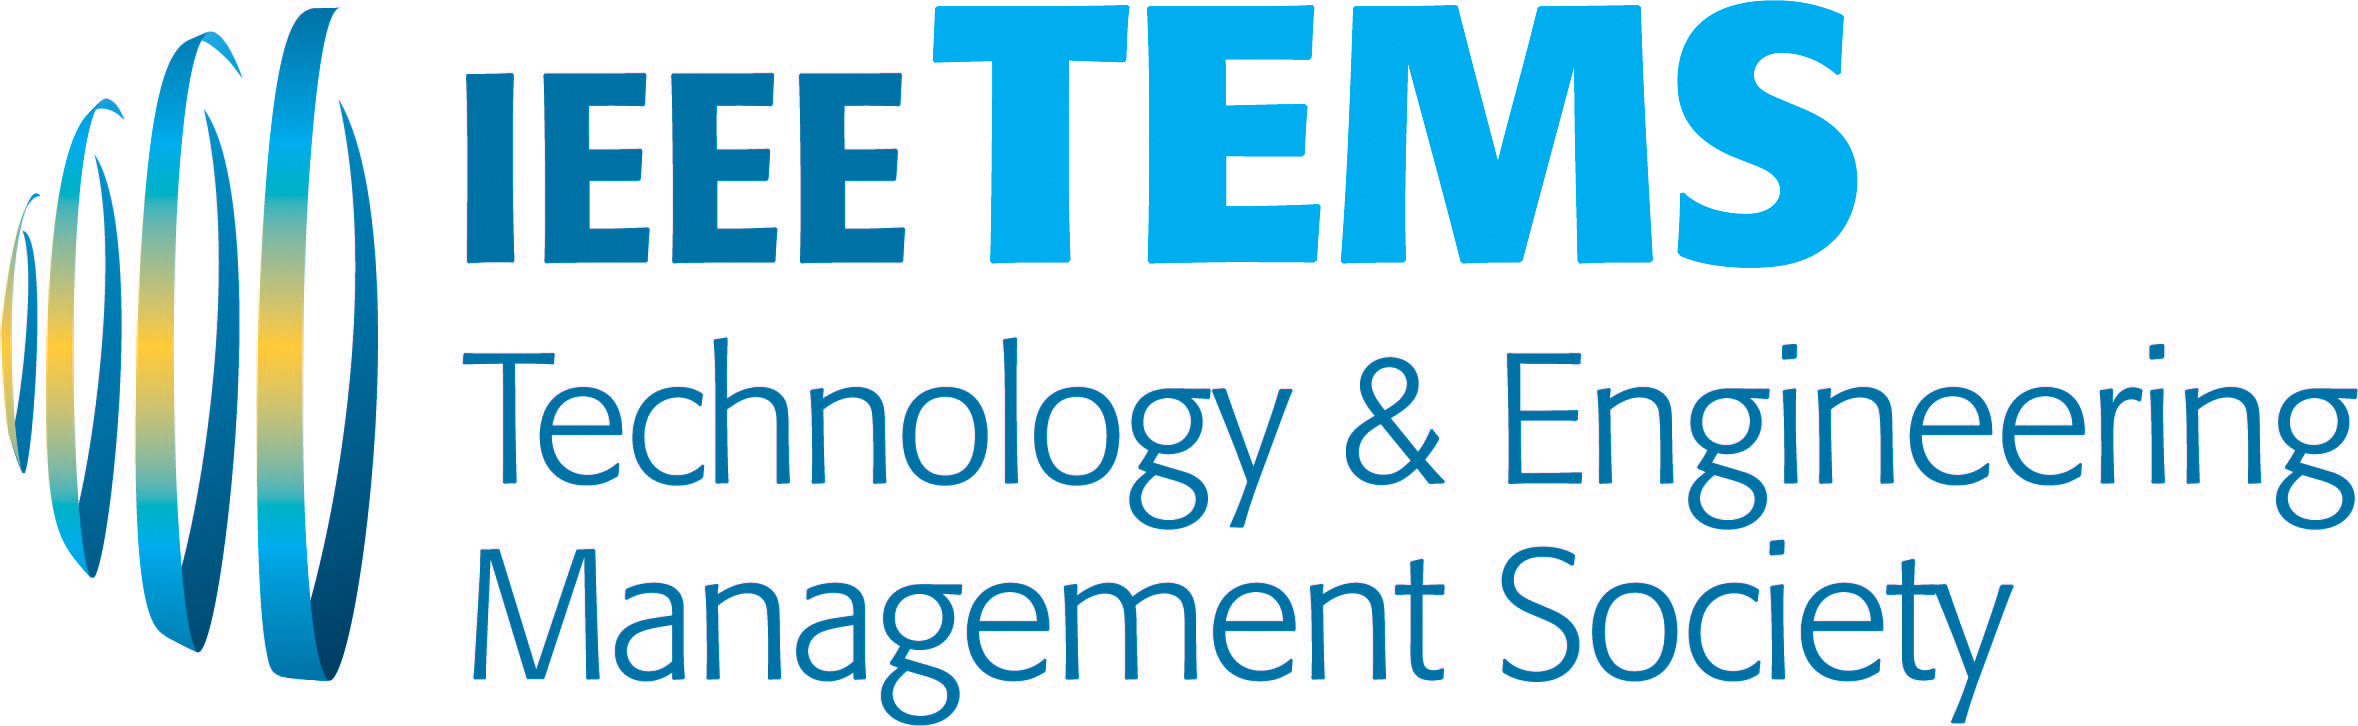 IEEE TEMS Logo. IEEE TEMS Technology and Engineering Management Society